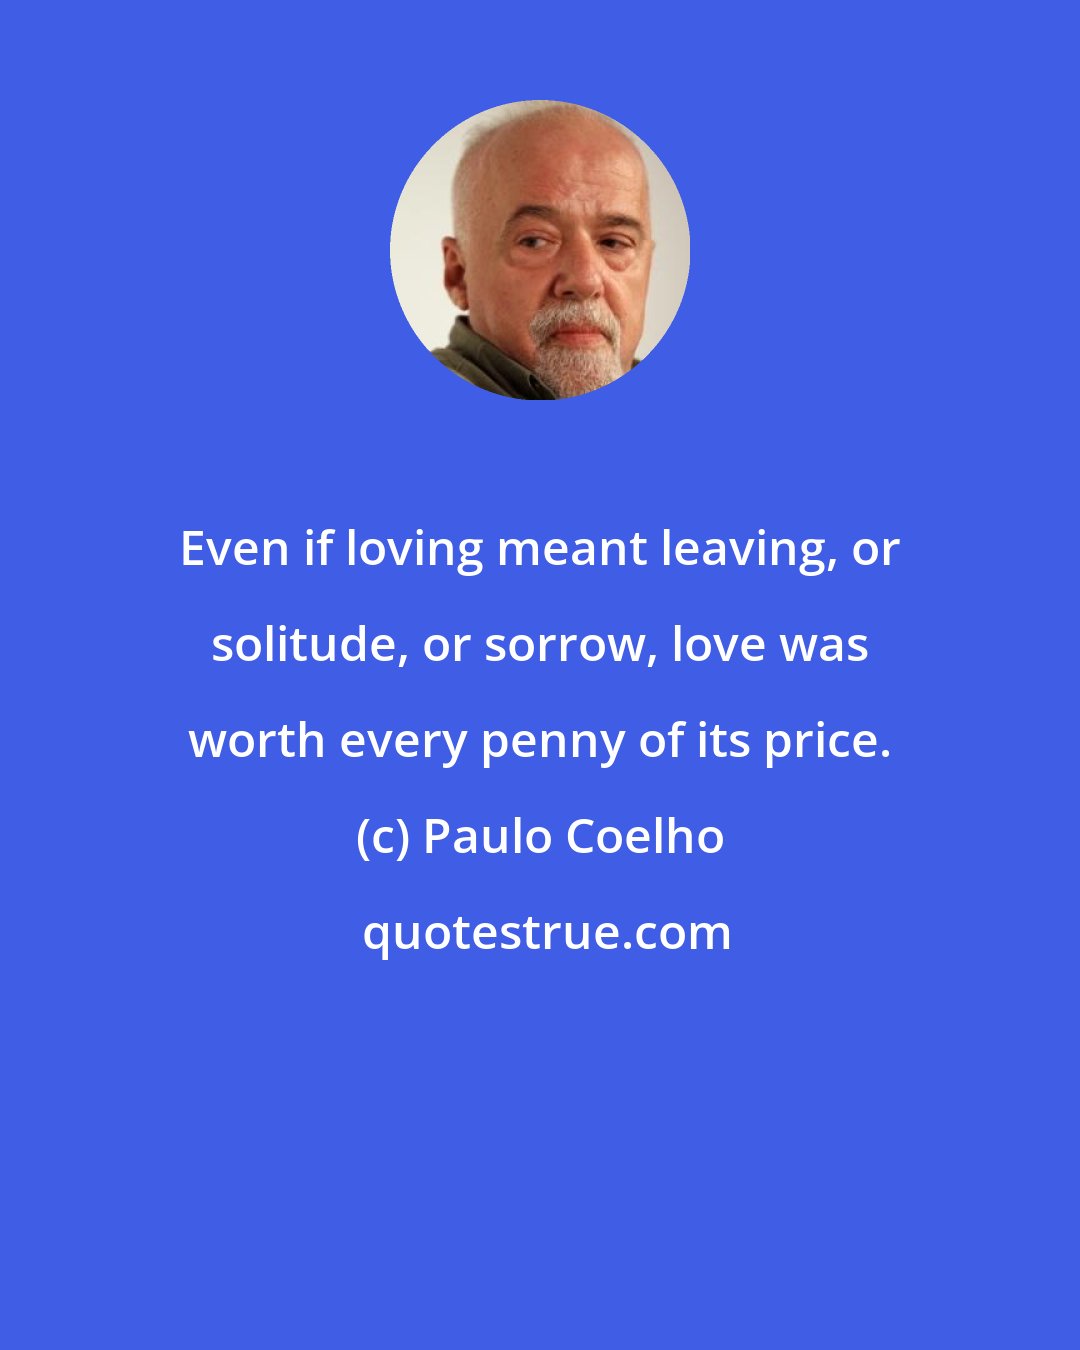 Paulo Coelho: Even if loving meant leaving, or solitude, or sorrow, love was worth every penny of its price.